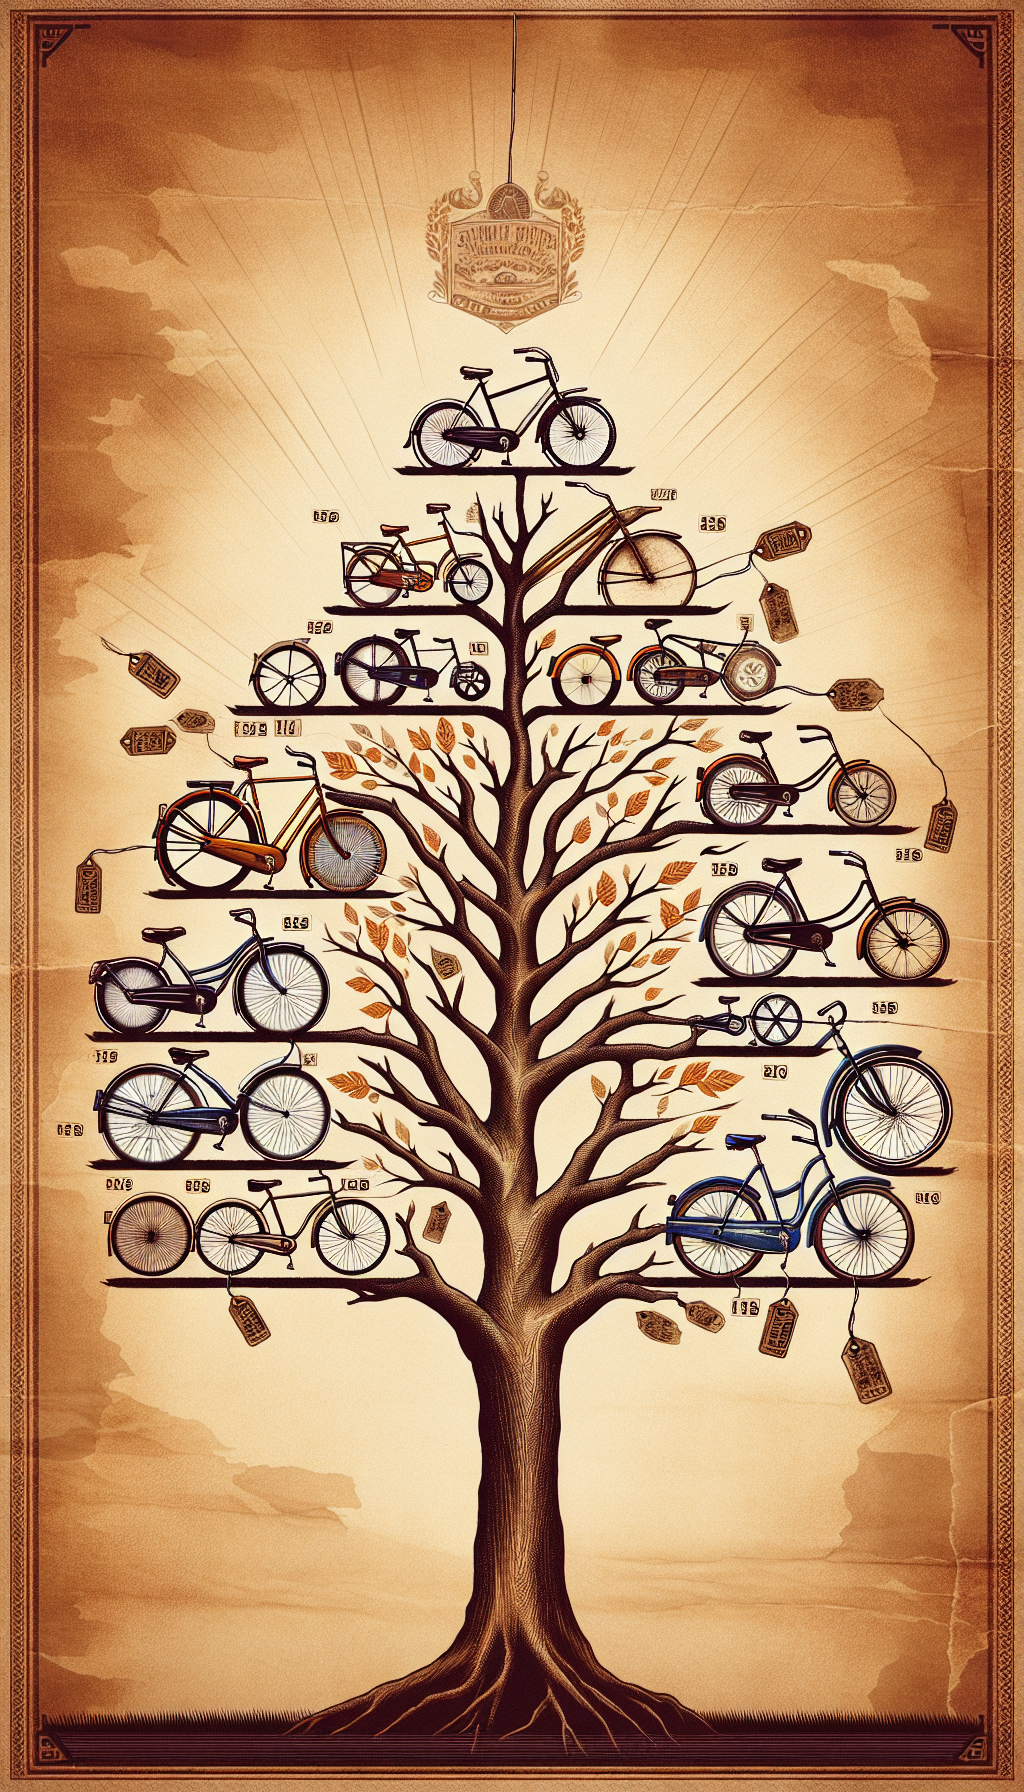 An illustration featuring an ornate family tree with branches made of vintage Schwinn bike frames, leading to a prized, mint-condition Schwinn at its roots, surrounded by faded price tags increasing in value as they ascend towards the newer models. The tree is set against a parchment backdrop, emphasizing historical significance, with each branch stylistically transitioning from sepia to vibrant color tones.